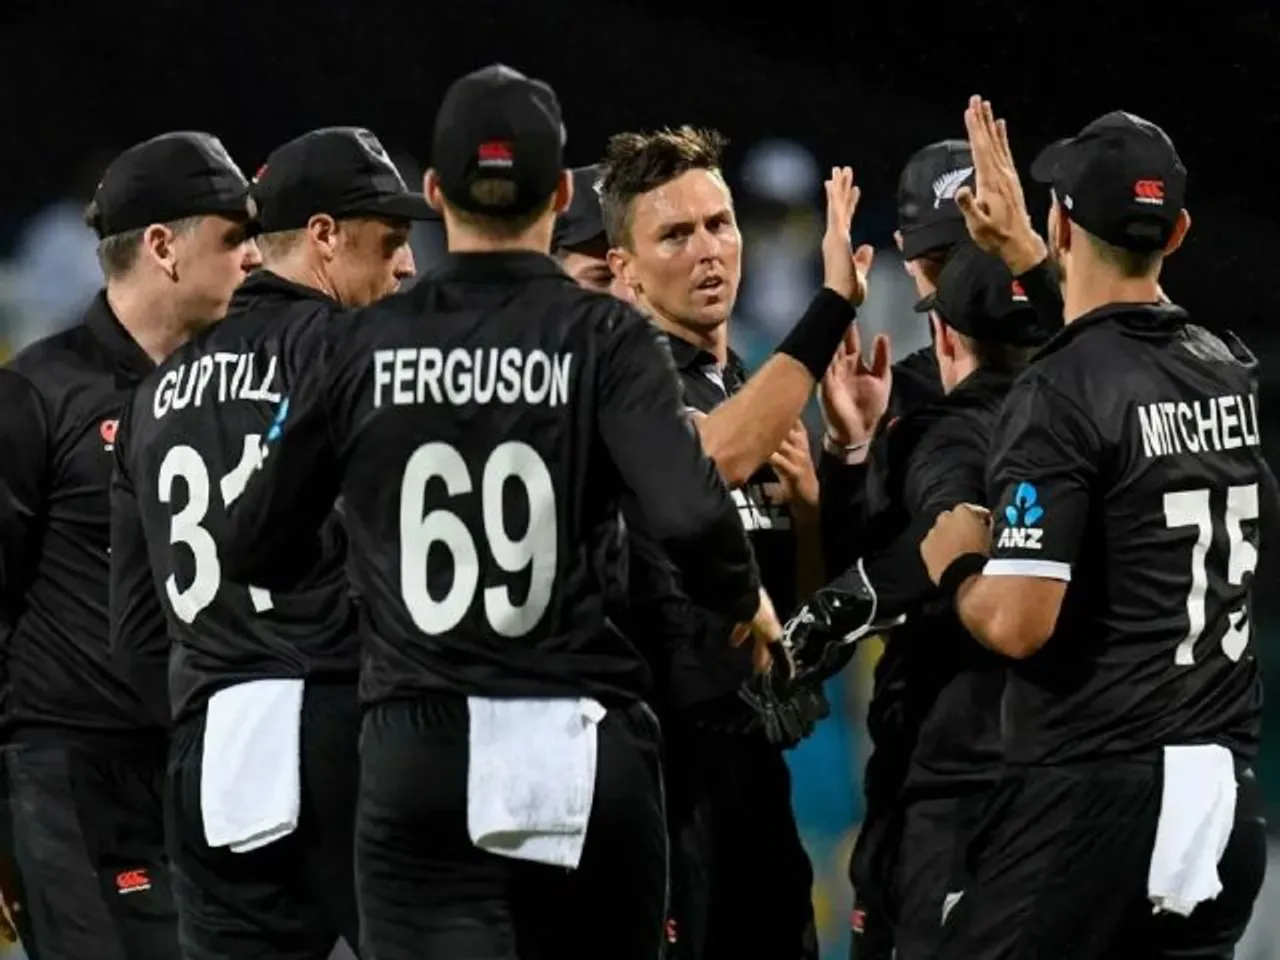 New Zealand squads for the ODI series against England